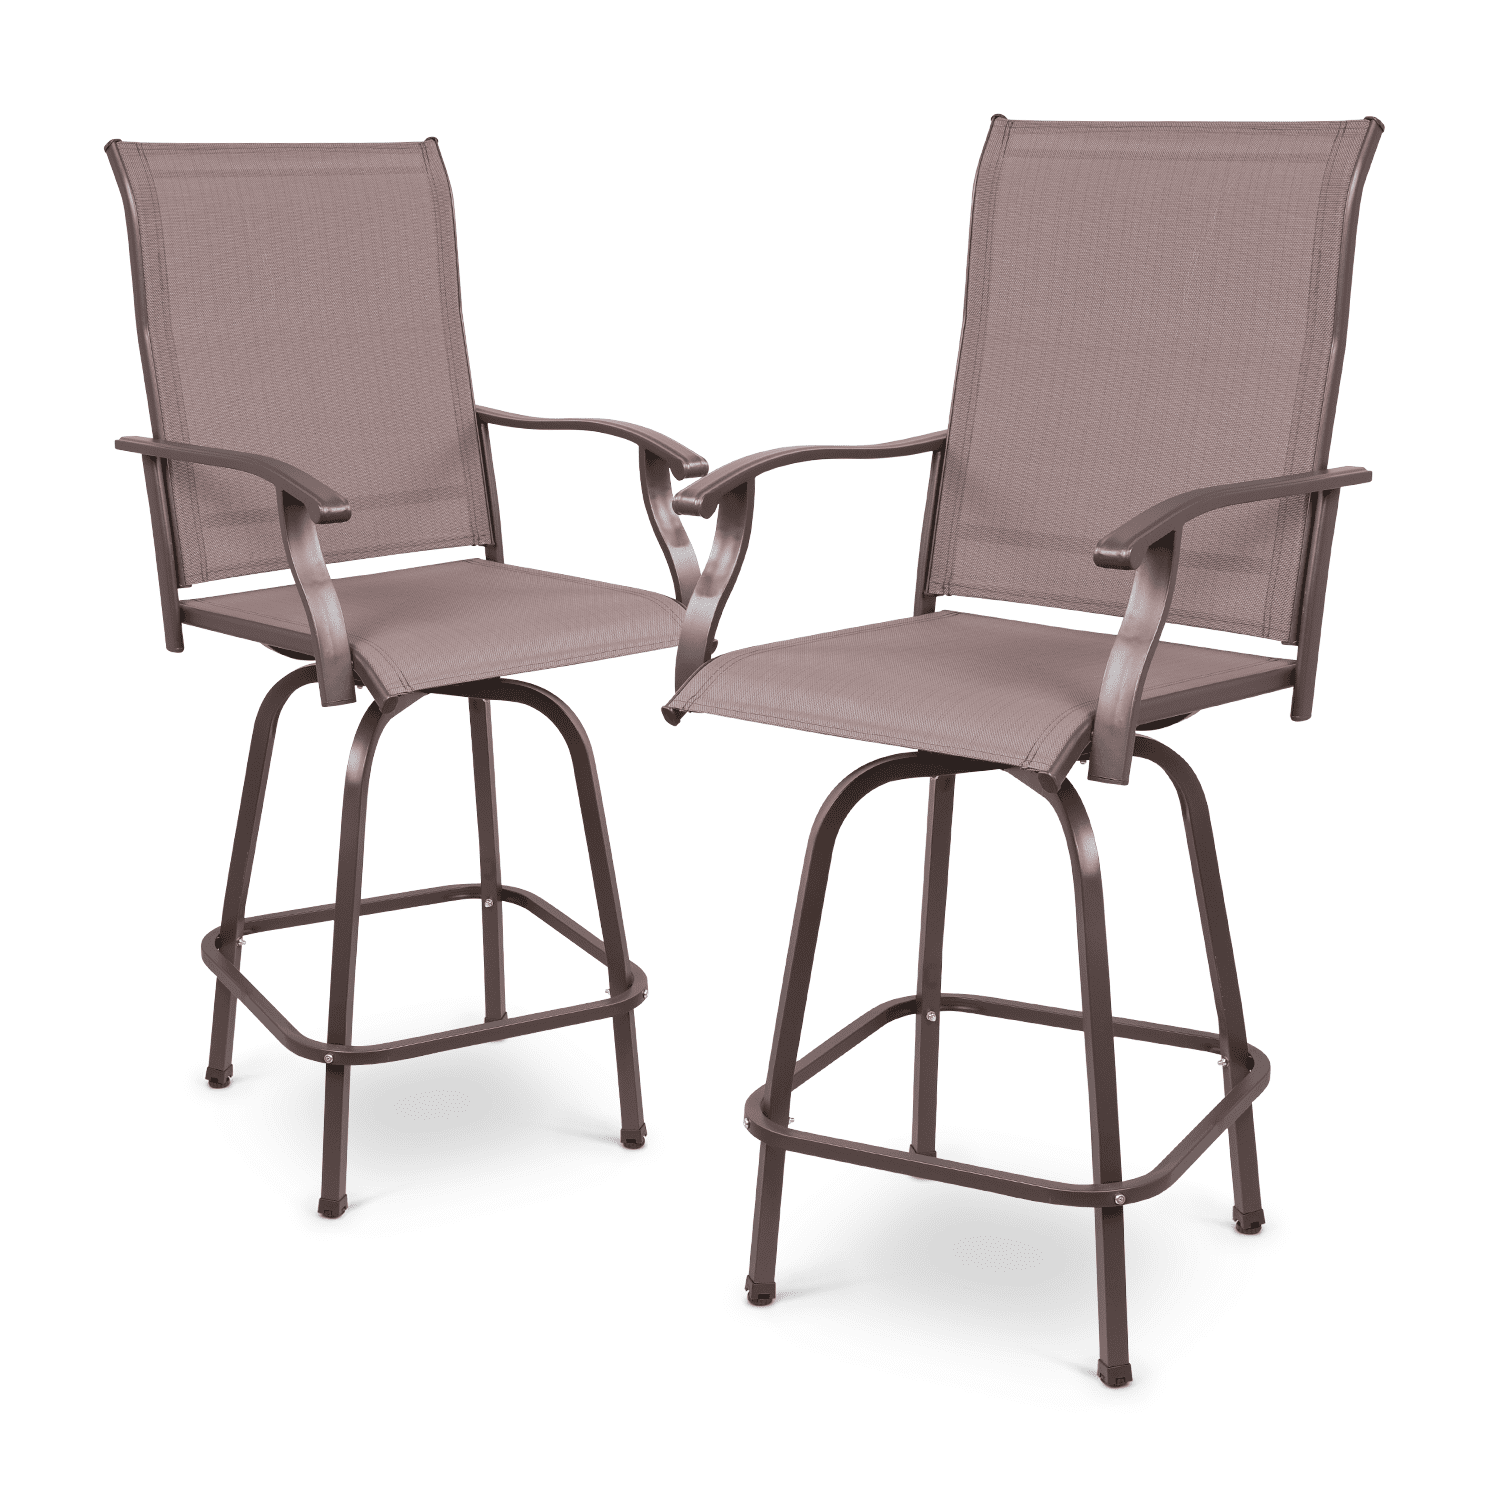 2 Charis Padded Textilene 360° Swivel Chairs with Wook Like Top Table Patio Bar Swivel Stools with High Back and Armrest Outdoor Furniture Set 